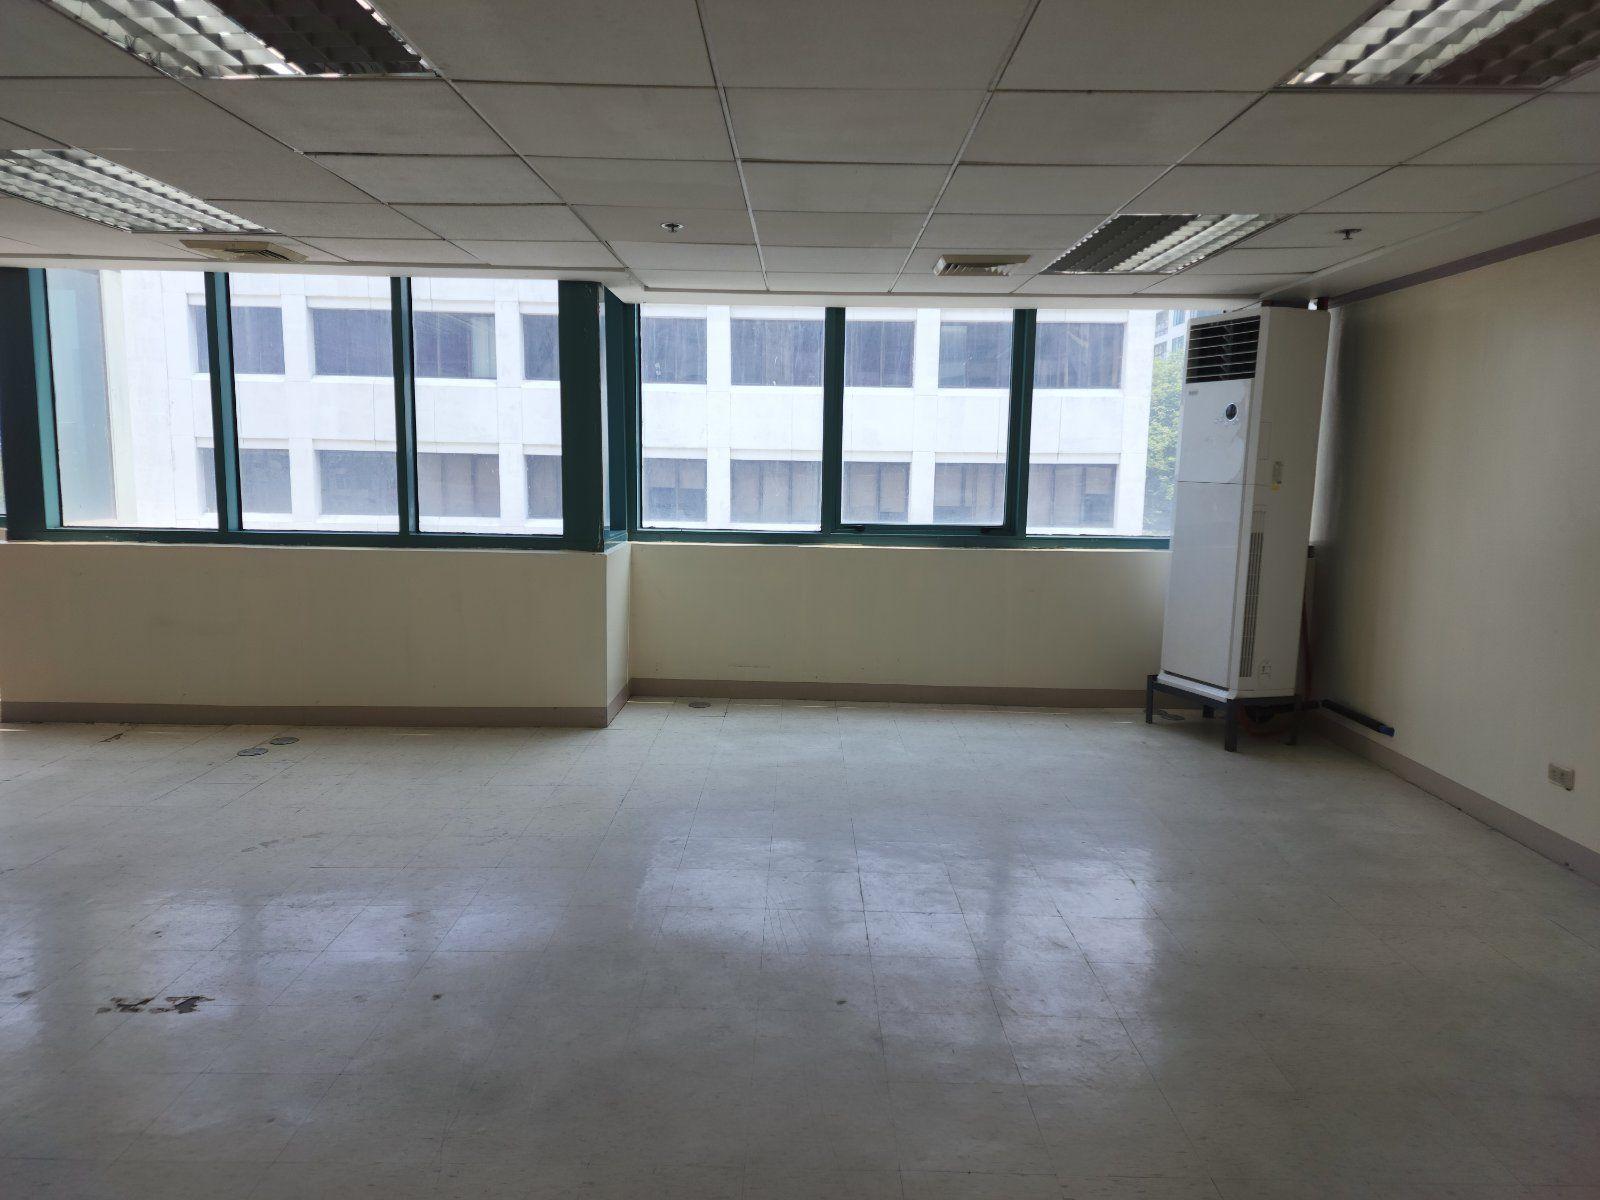 100 sqm Office Space Lease Rent Alabang Muntinlupa Philippines